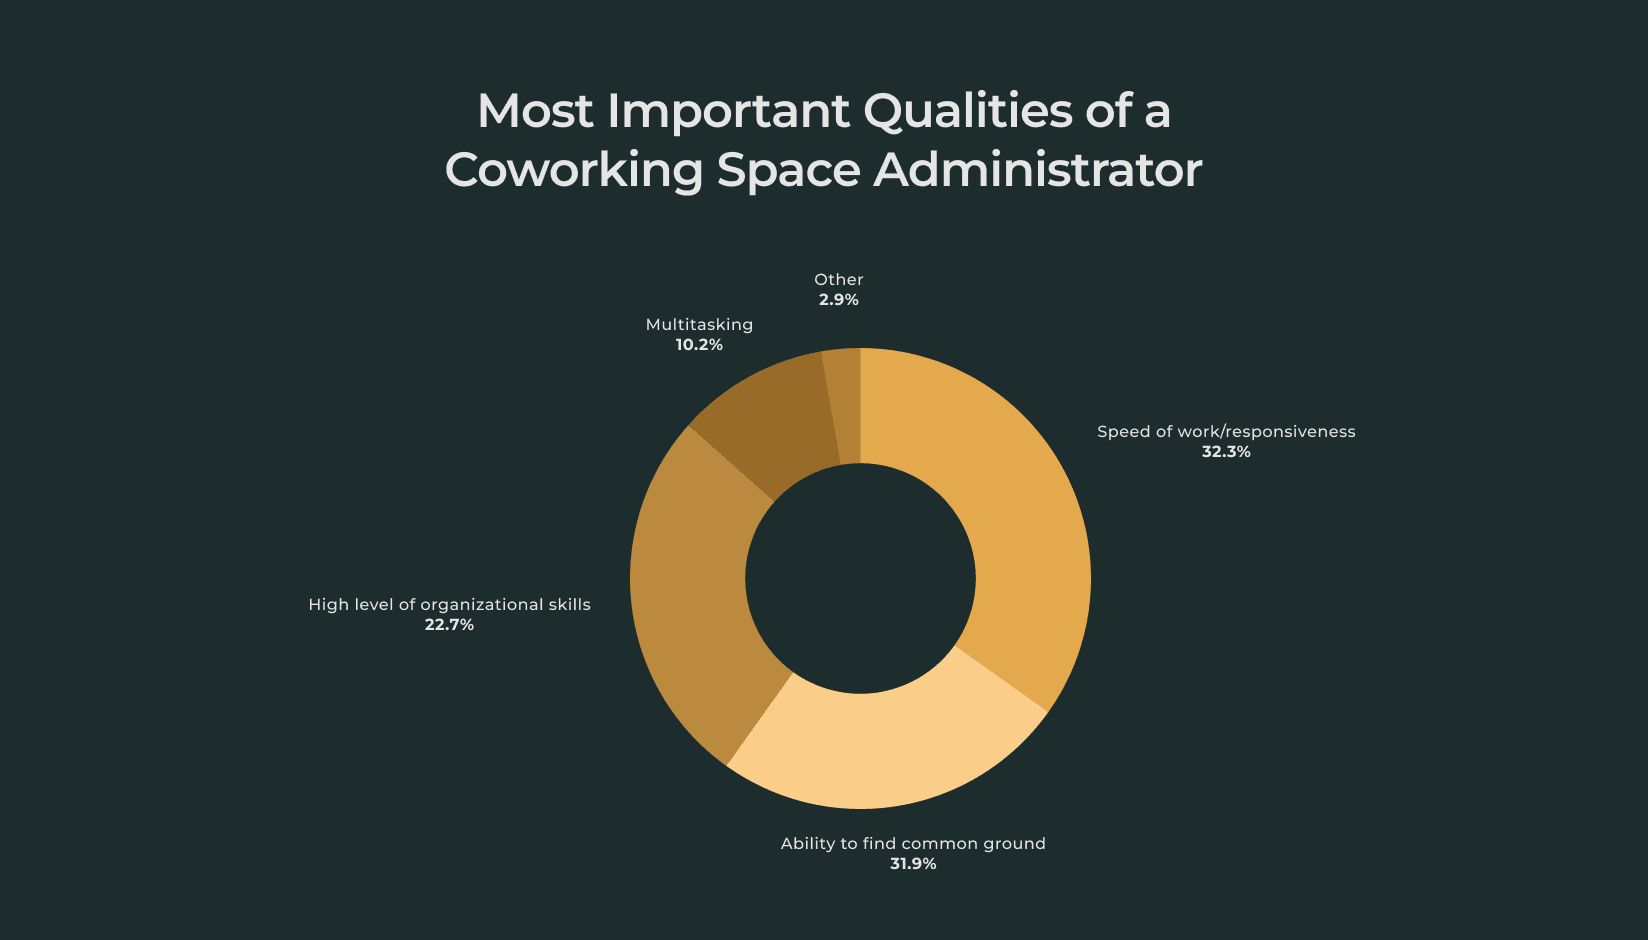 Most important qualities of coworking space administrators - andcards survey